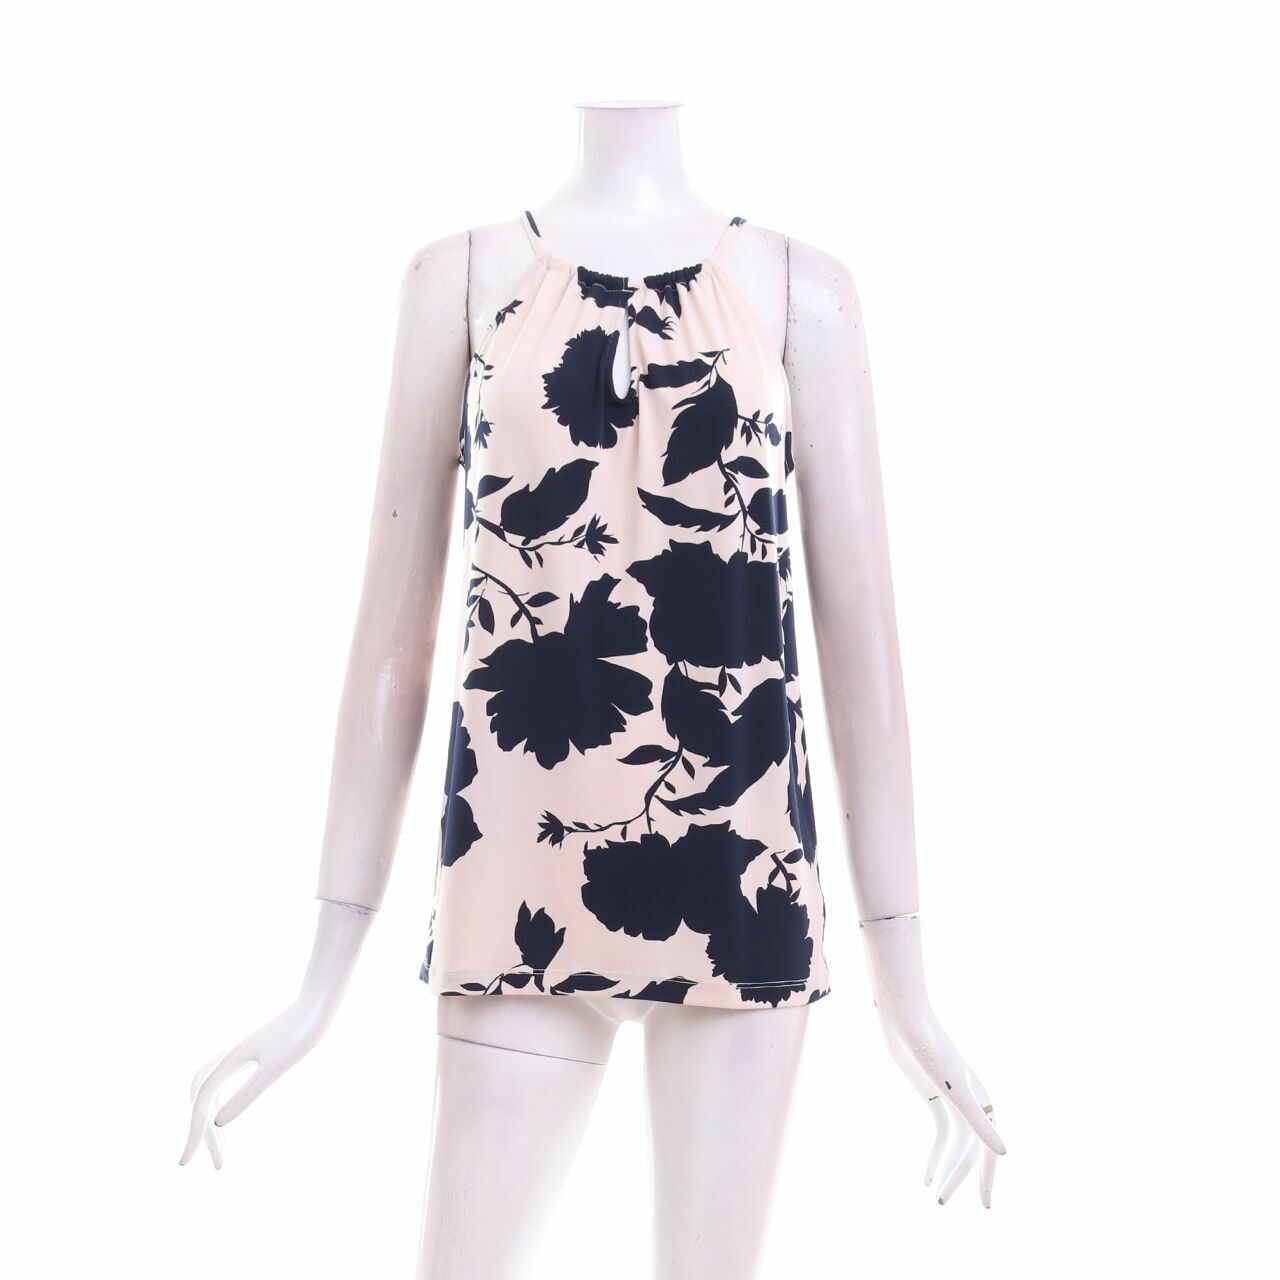 The Limited Black & Cream Floral Sleeveless